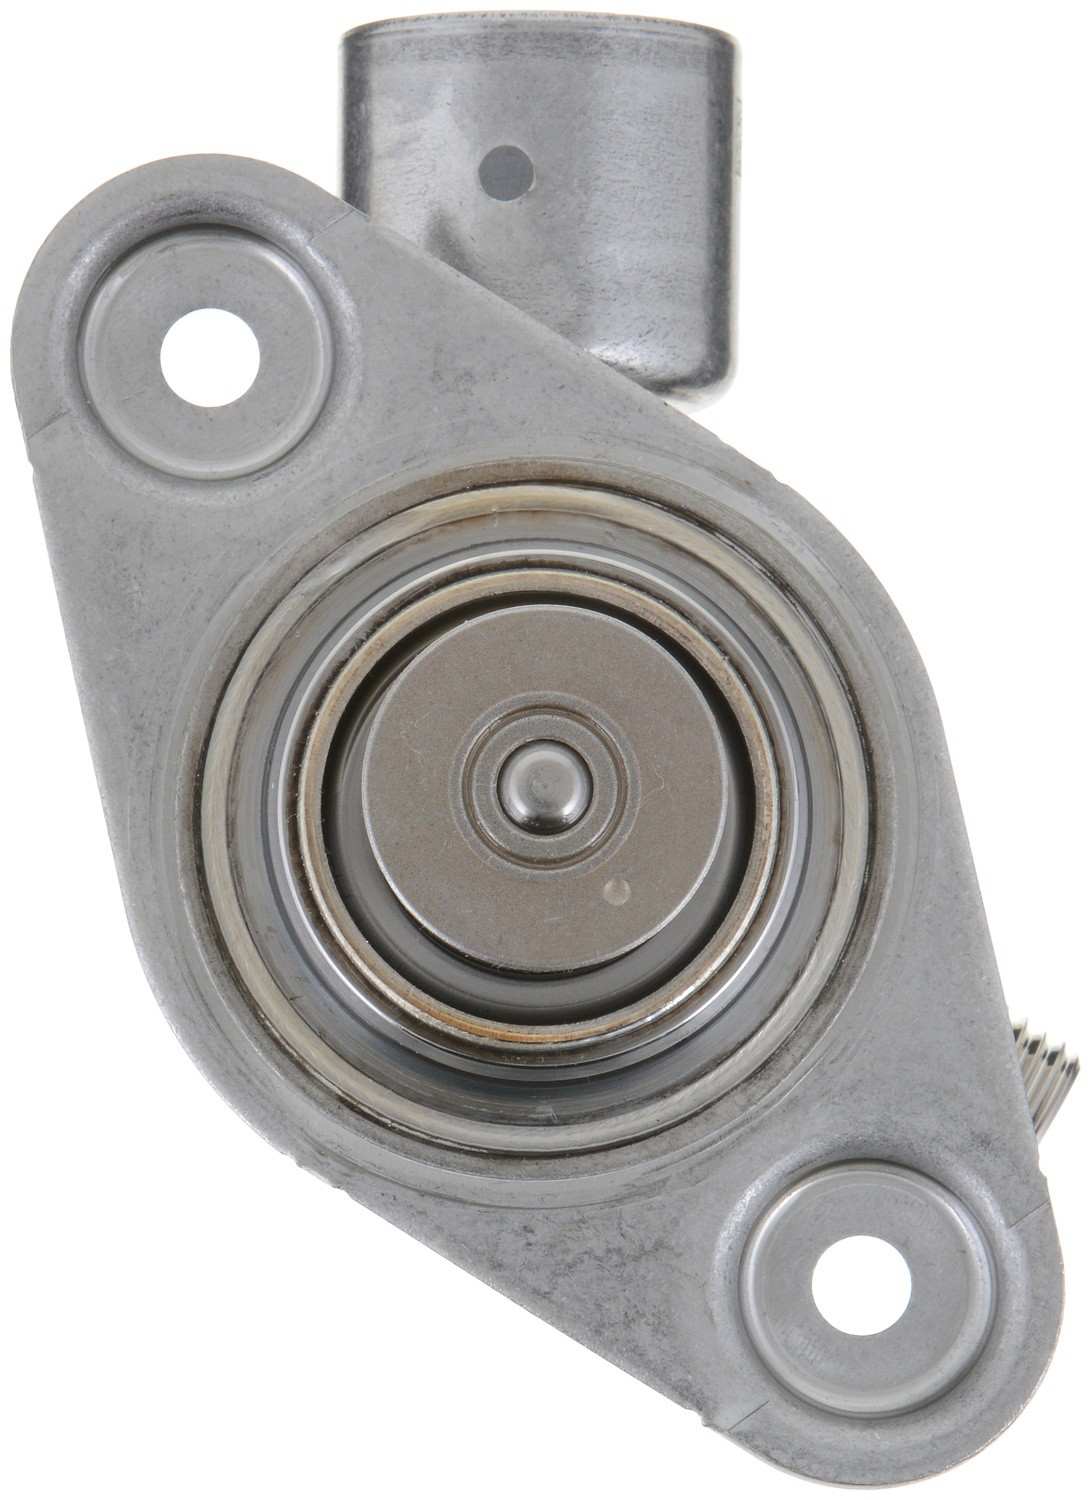 Bottom View of Direct Injection High Pressure Fuel Pump BOSCH 66808